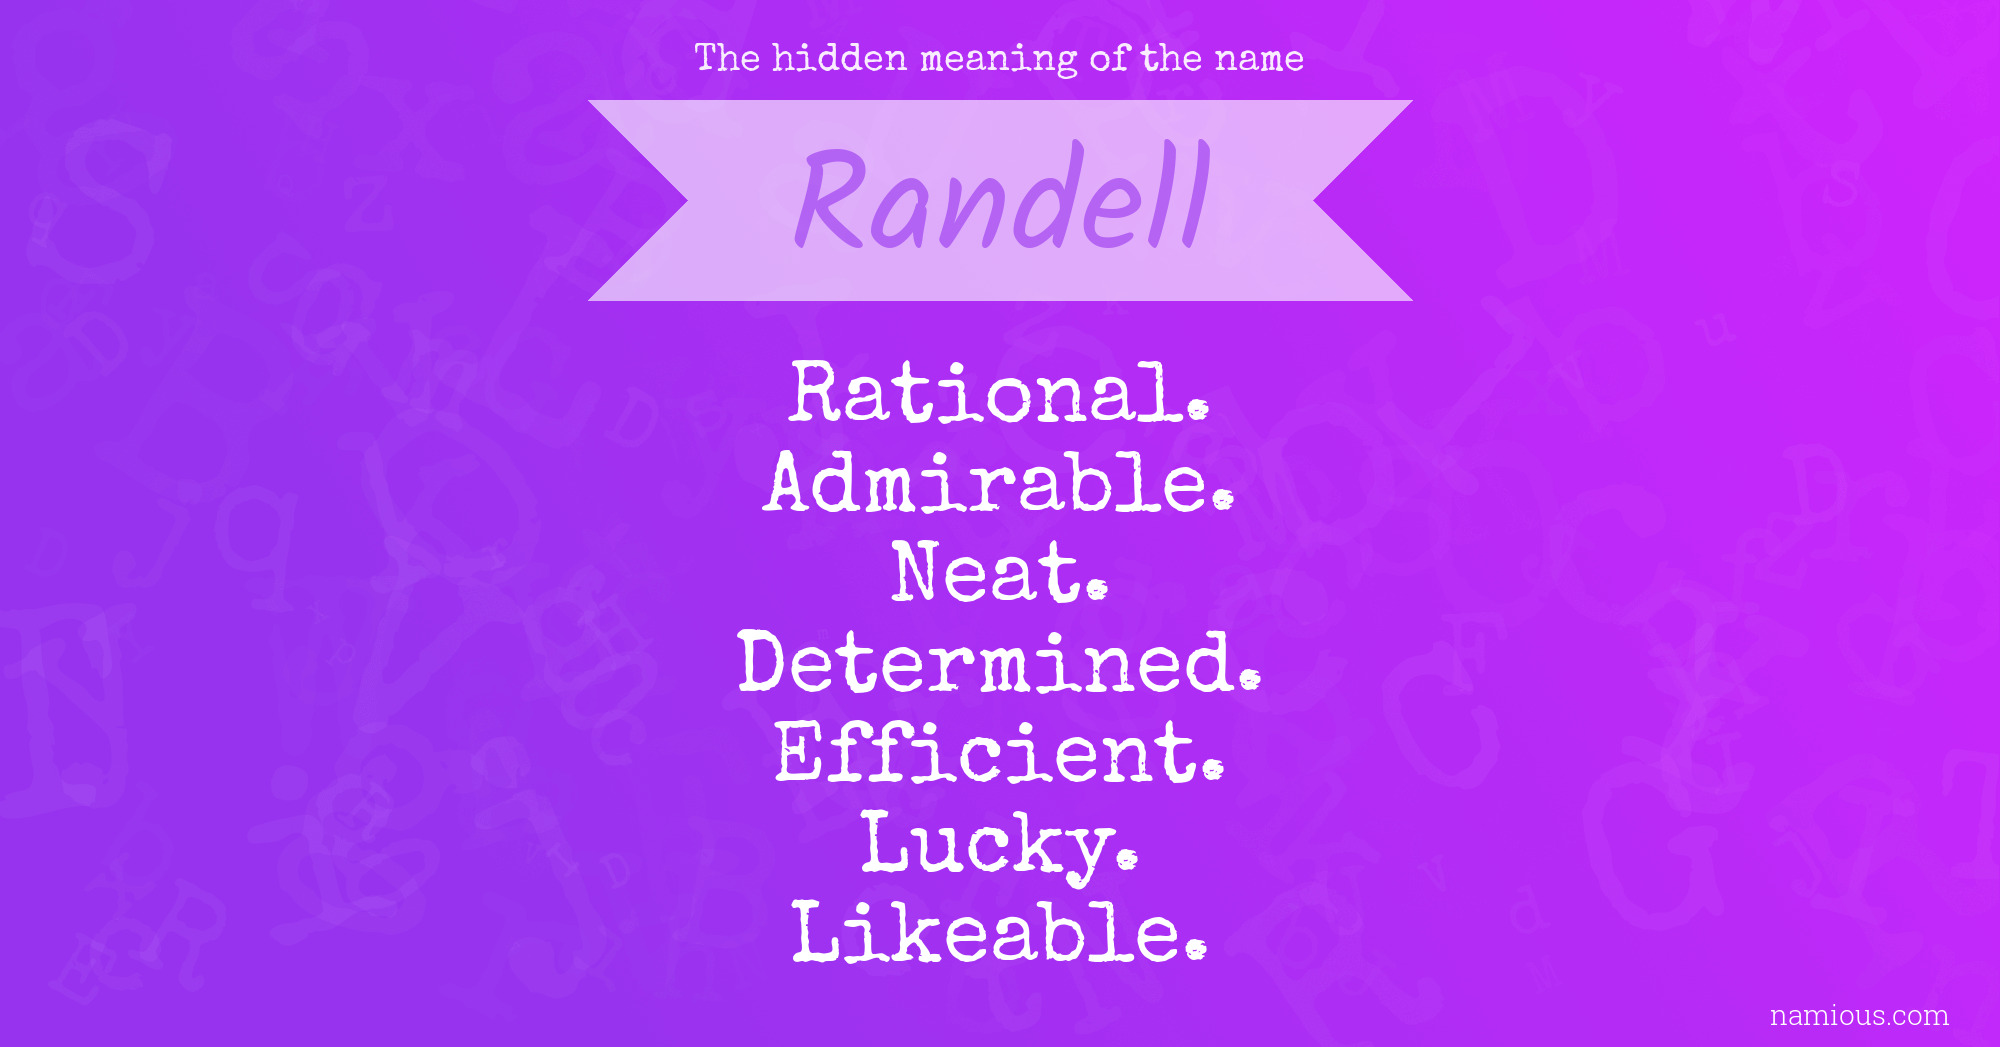 The hidden meaning of the name Randell